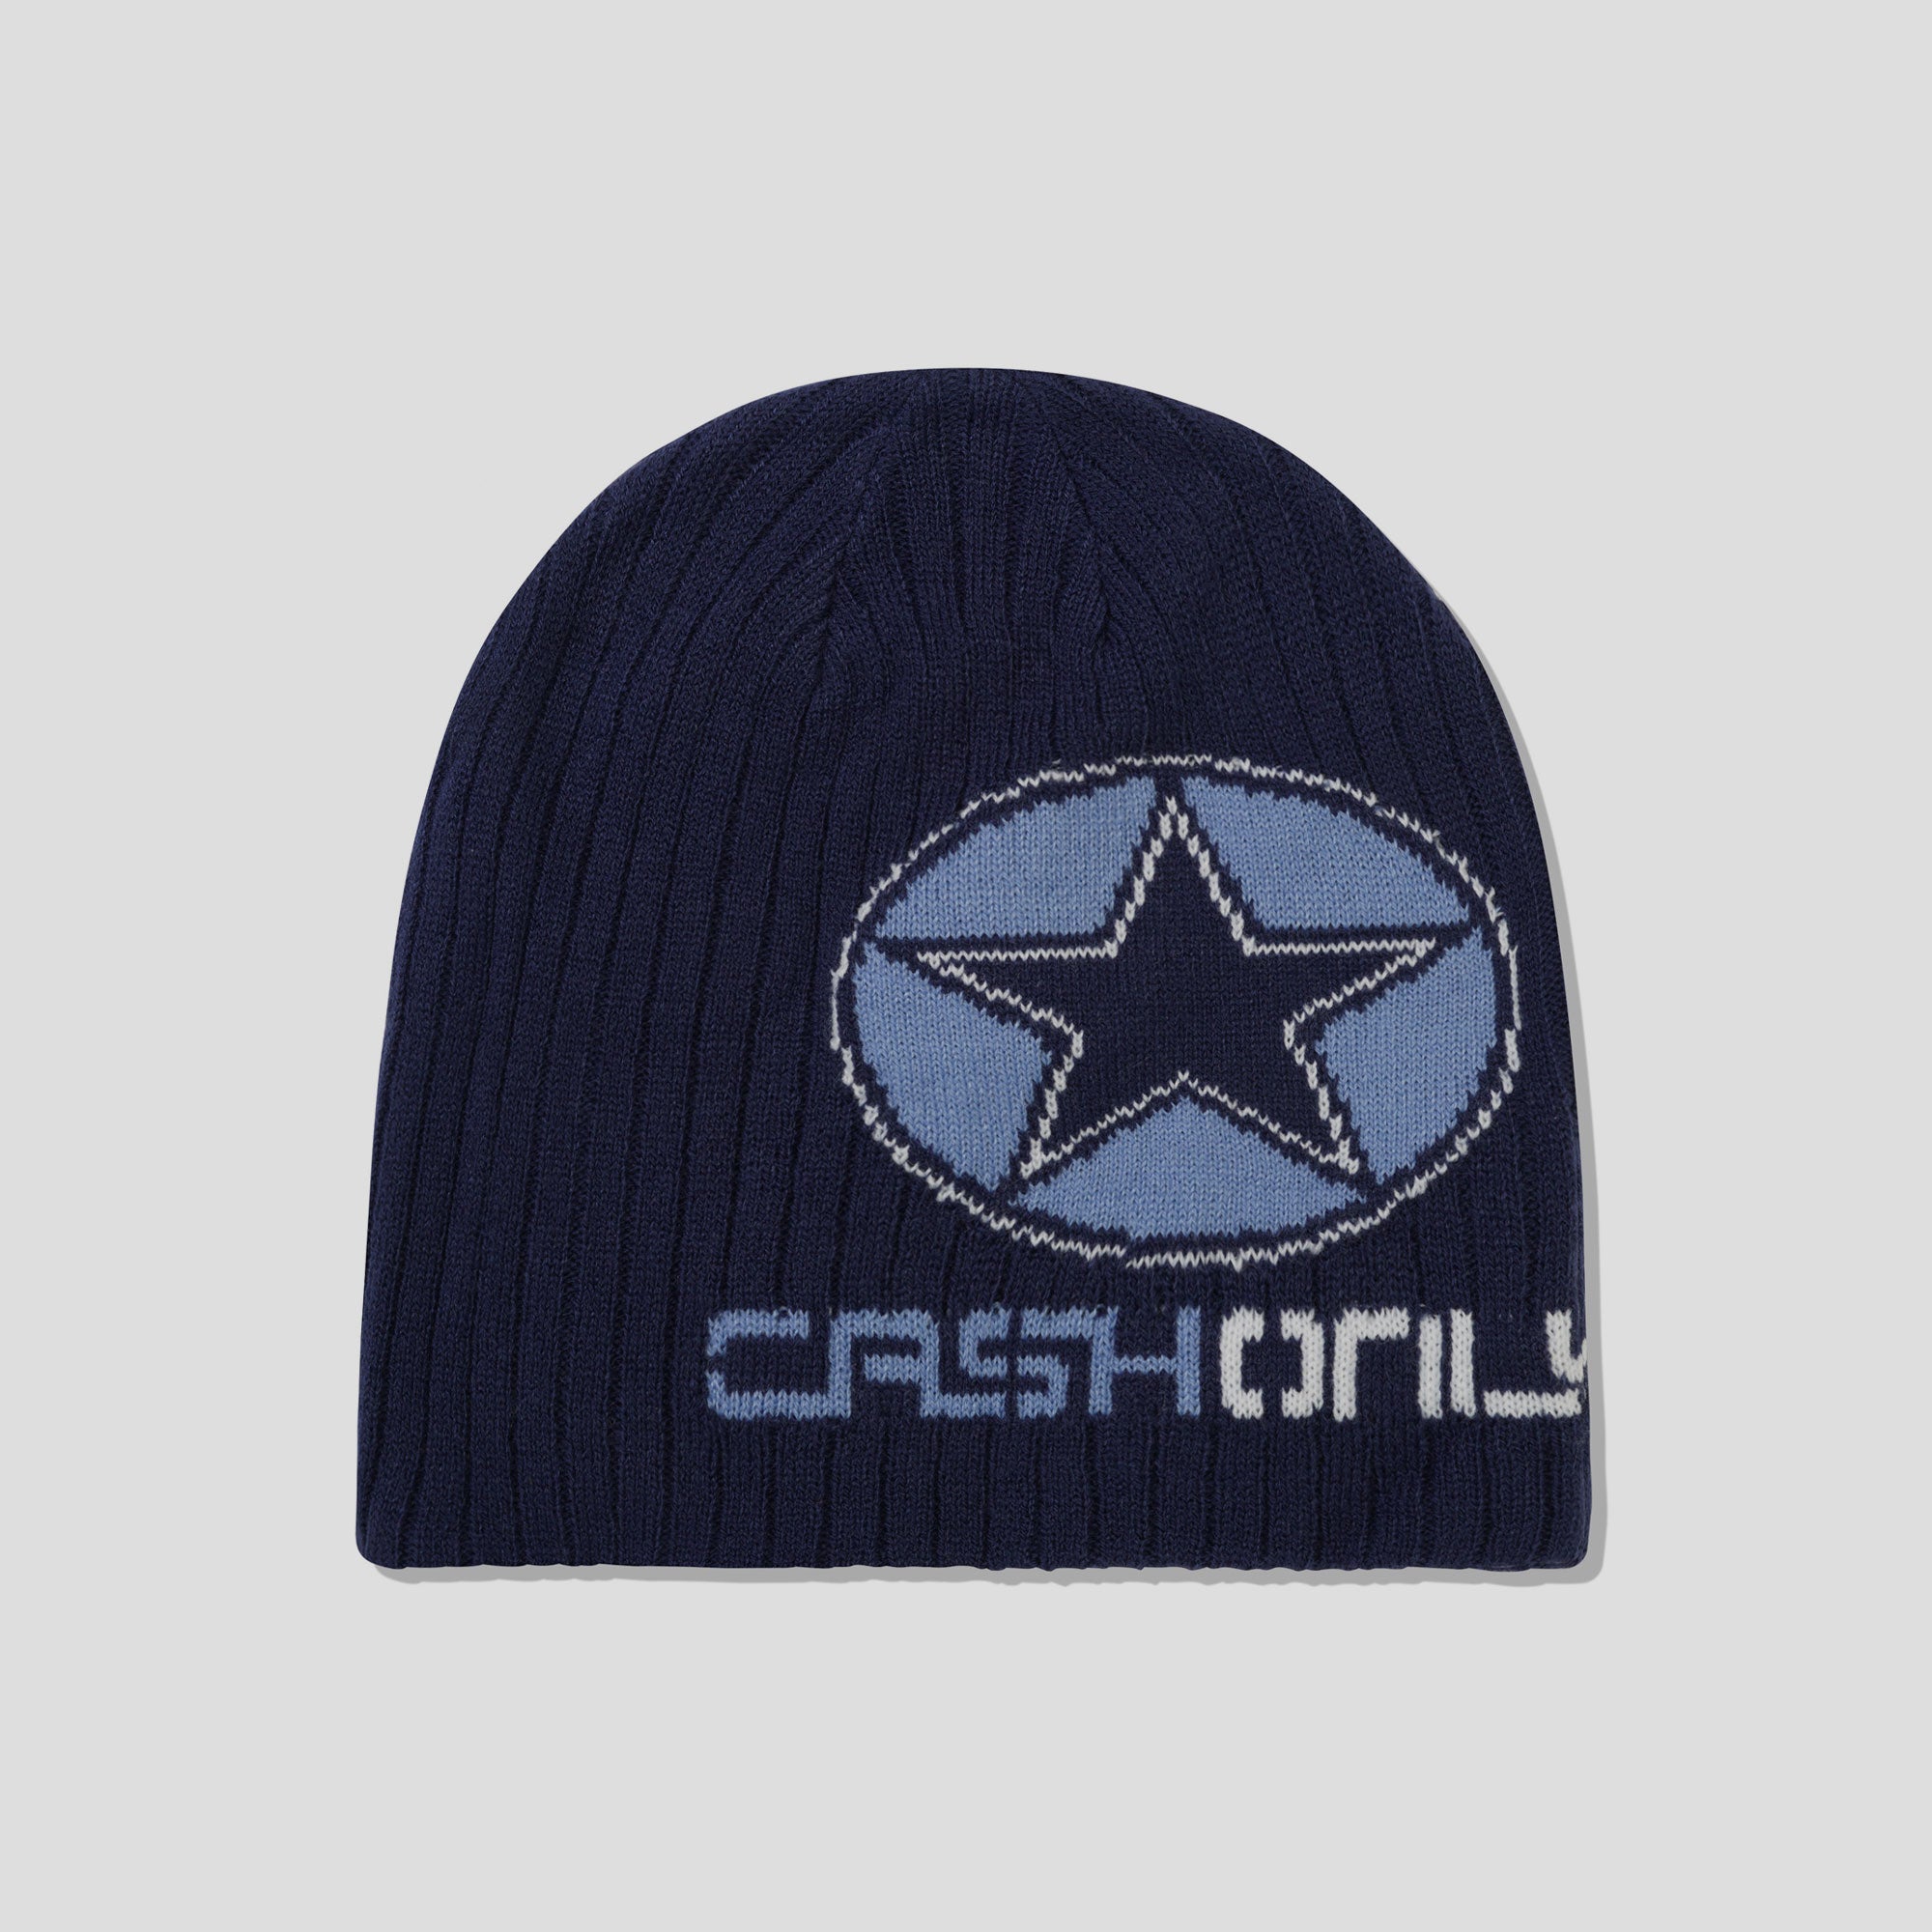 Cash Only All Weather Beanie - Navy